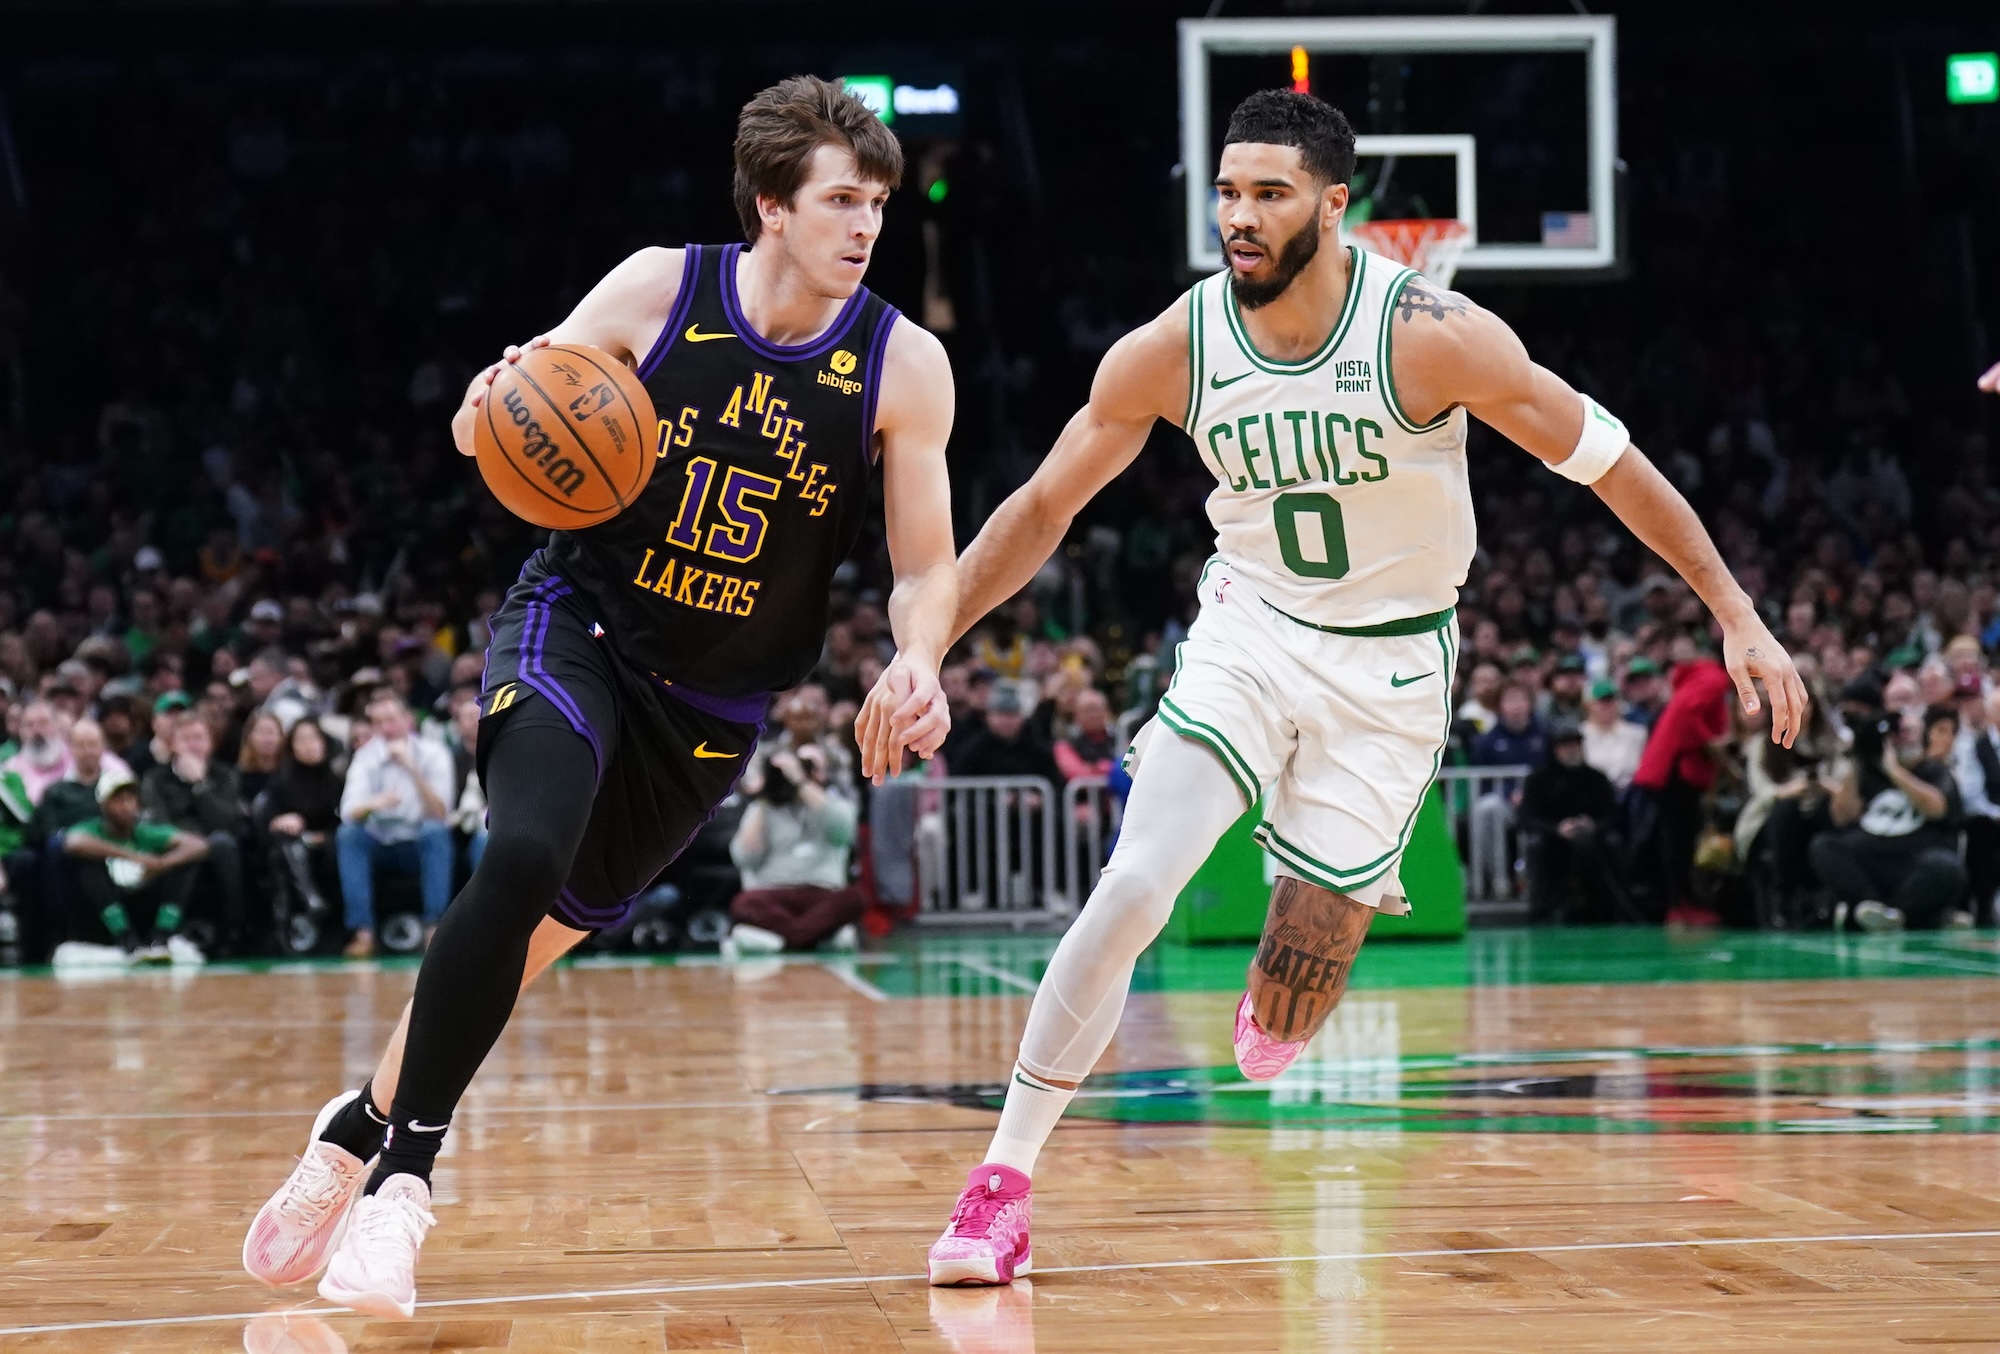 Los Angeles Lakers guard Austin Reaves drives the ball against Boston Celtics forward Jayson Tatum in the first quarter at TD Garden in Boston on Thursday.